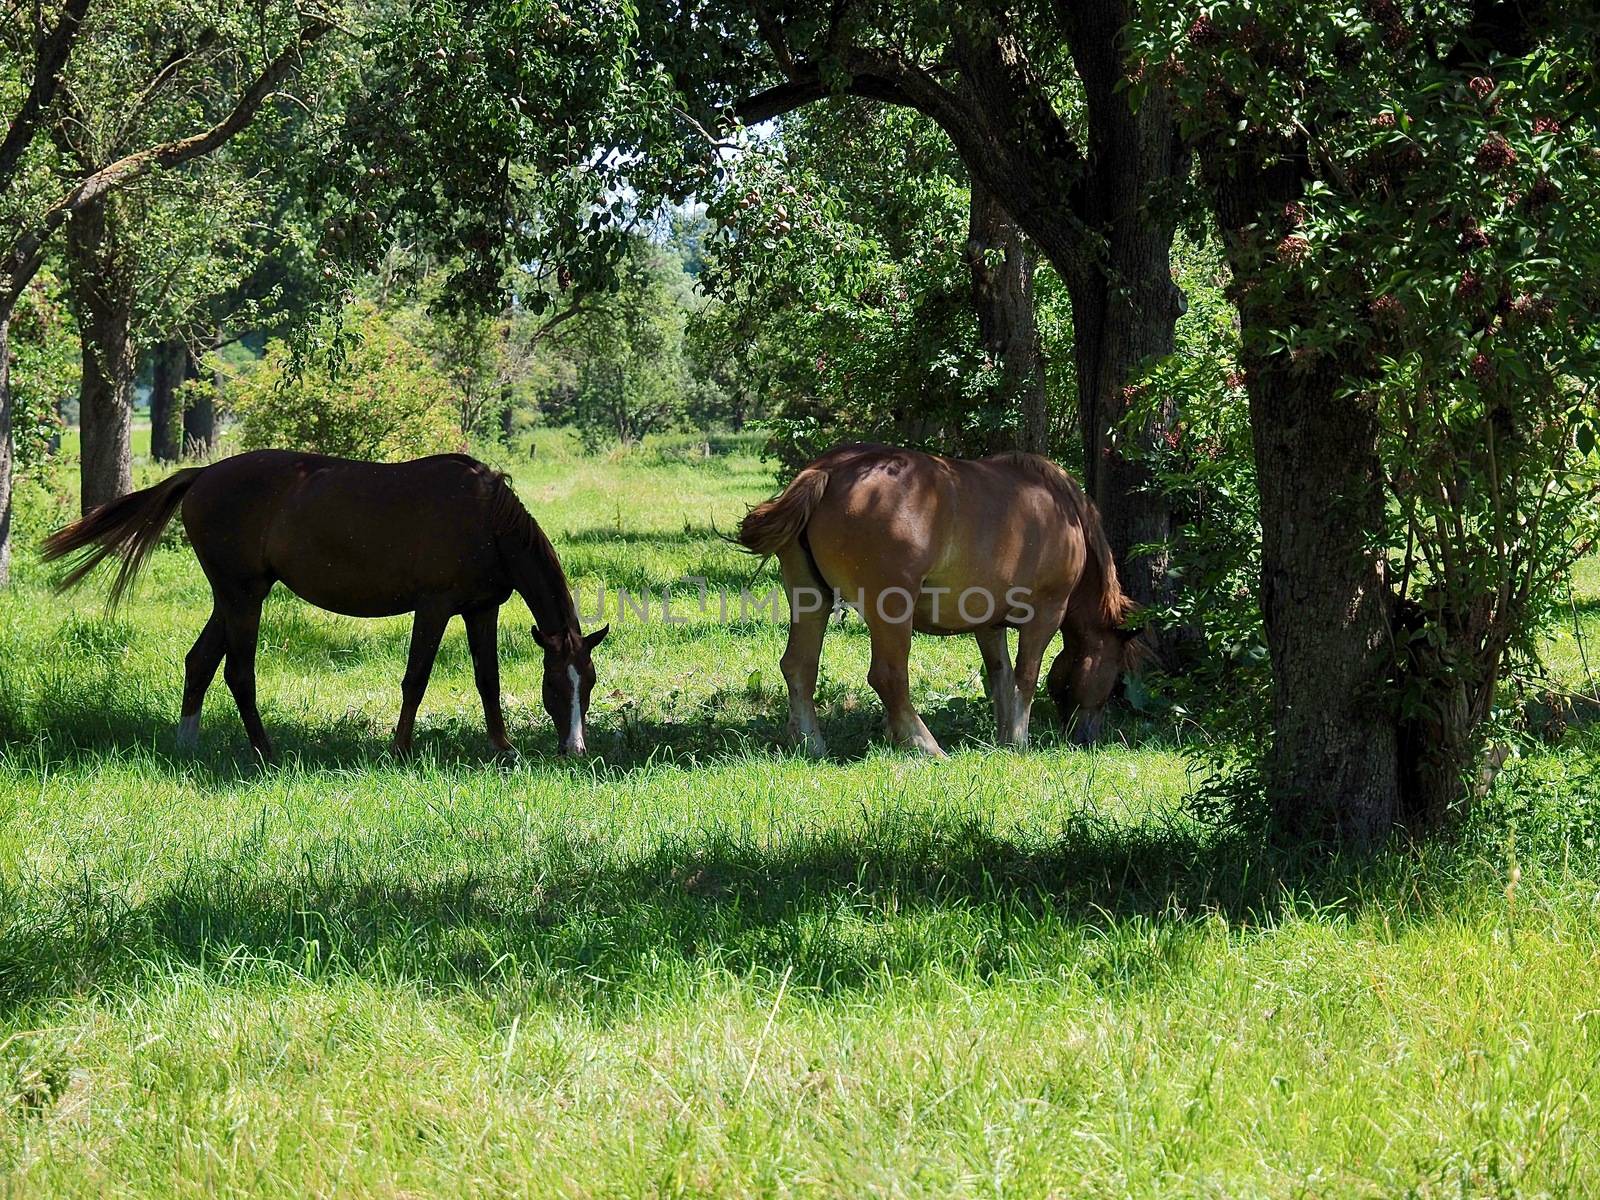 Horses in the Beautiful nature with meadows and trees along Rhine river by Stimmungsbilder